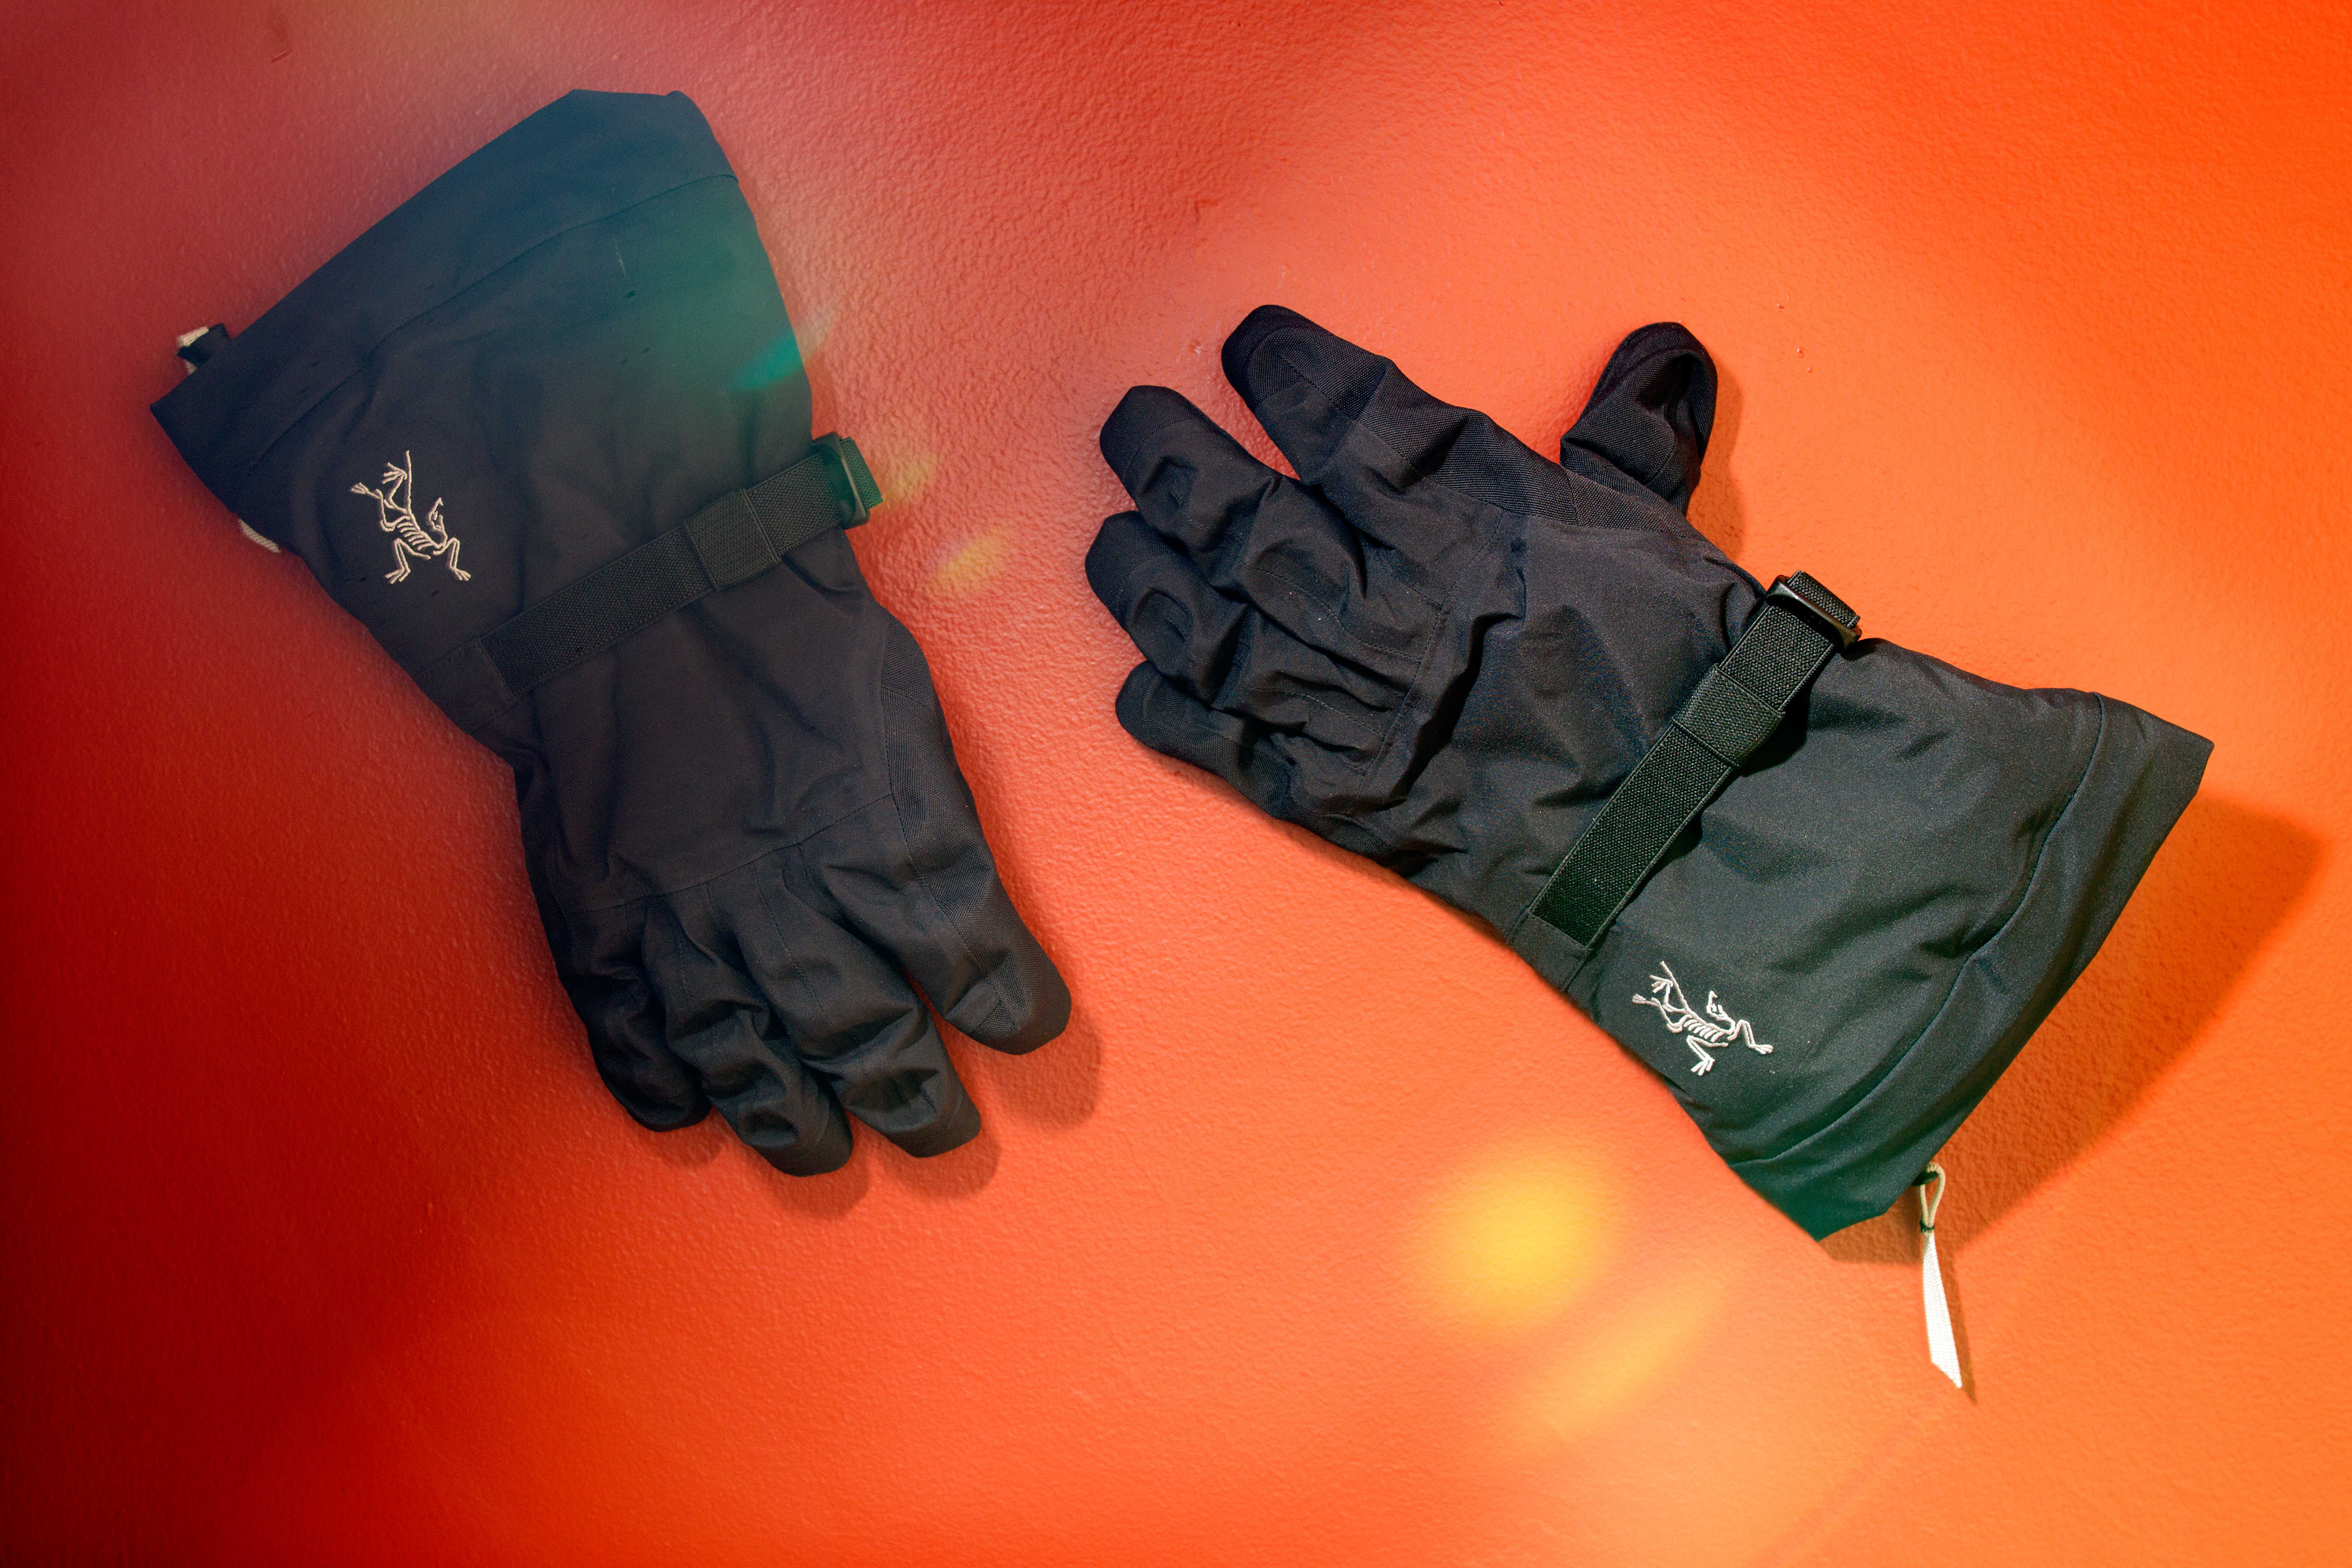 With the Lithic ski gloves from Arc'teryx, there's no need to sacrifice dexterity for warmth.